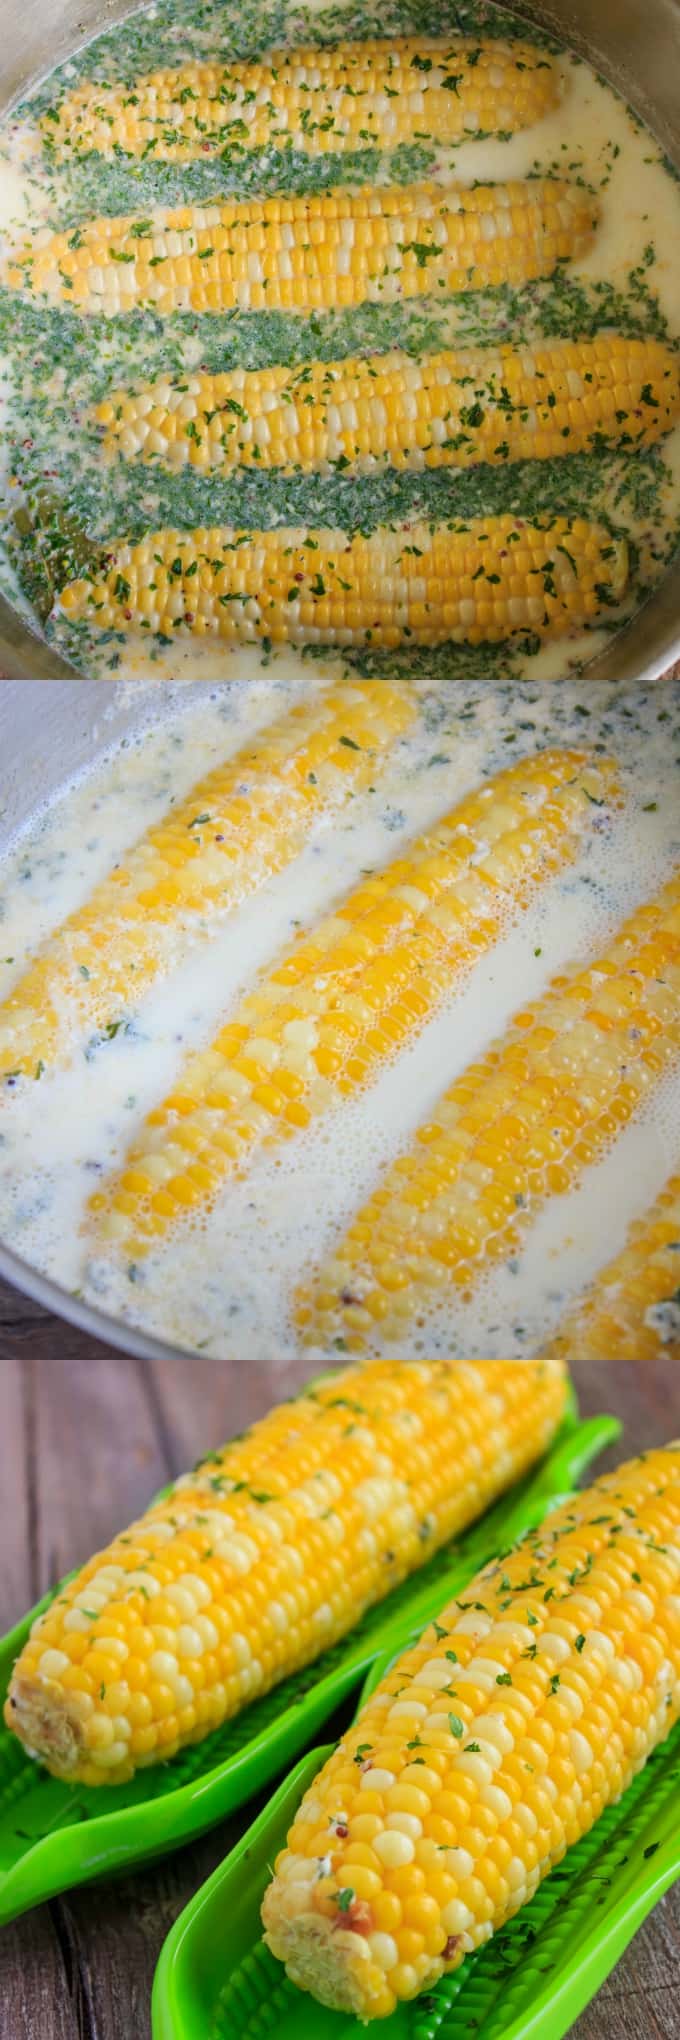 Corn on the Cob Boiled in a Milk Broth in pot, corn on the cob on wooden table